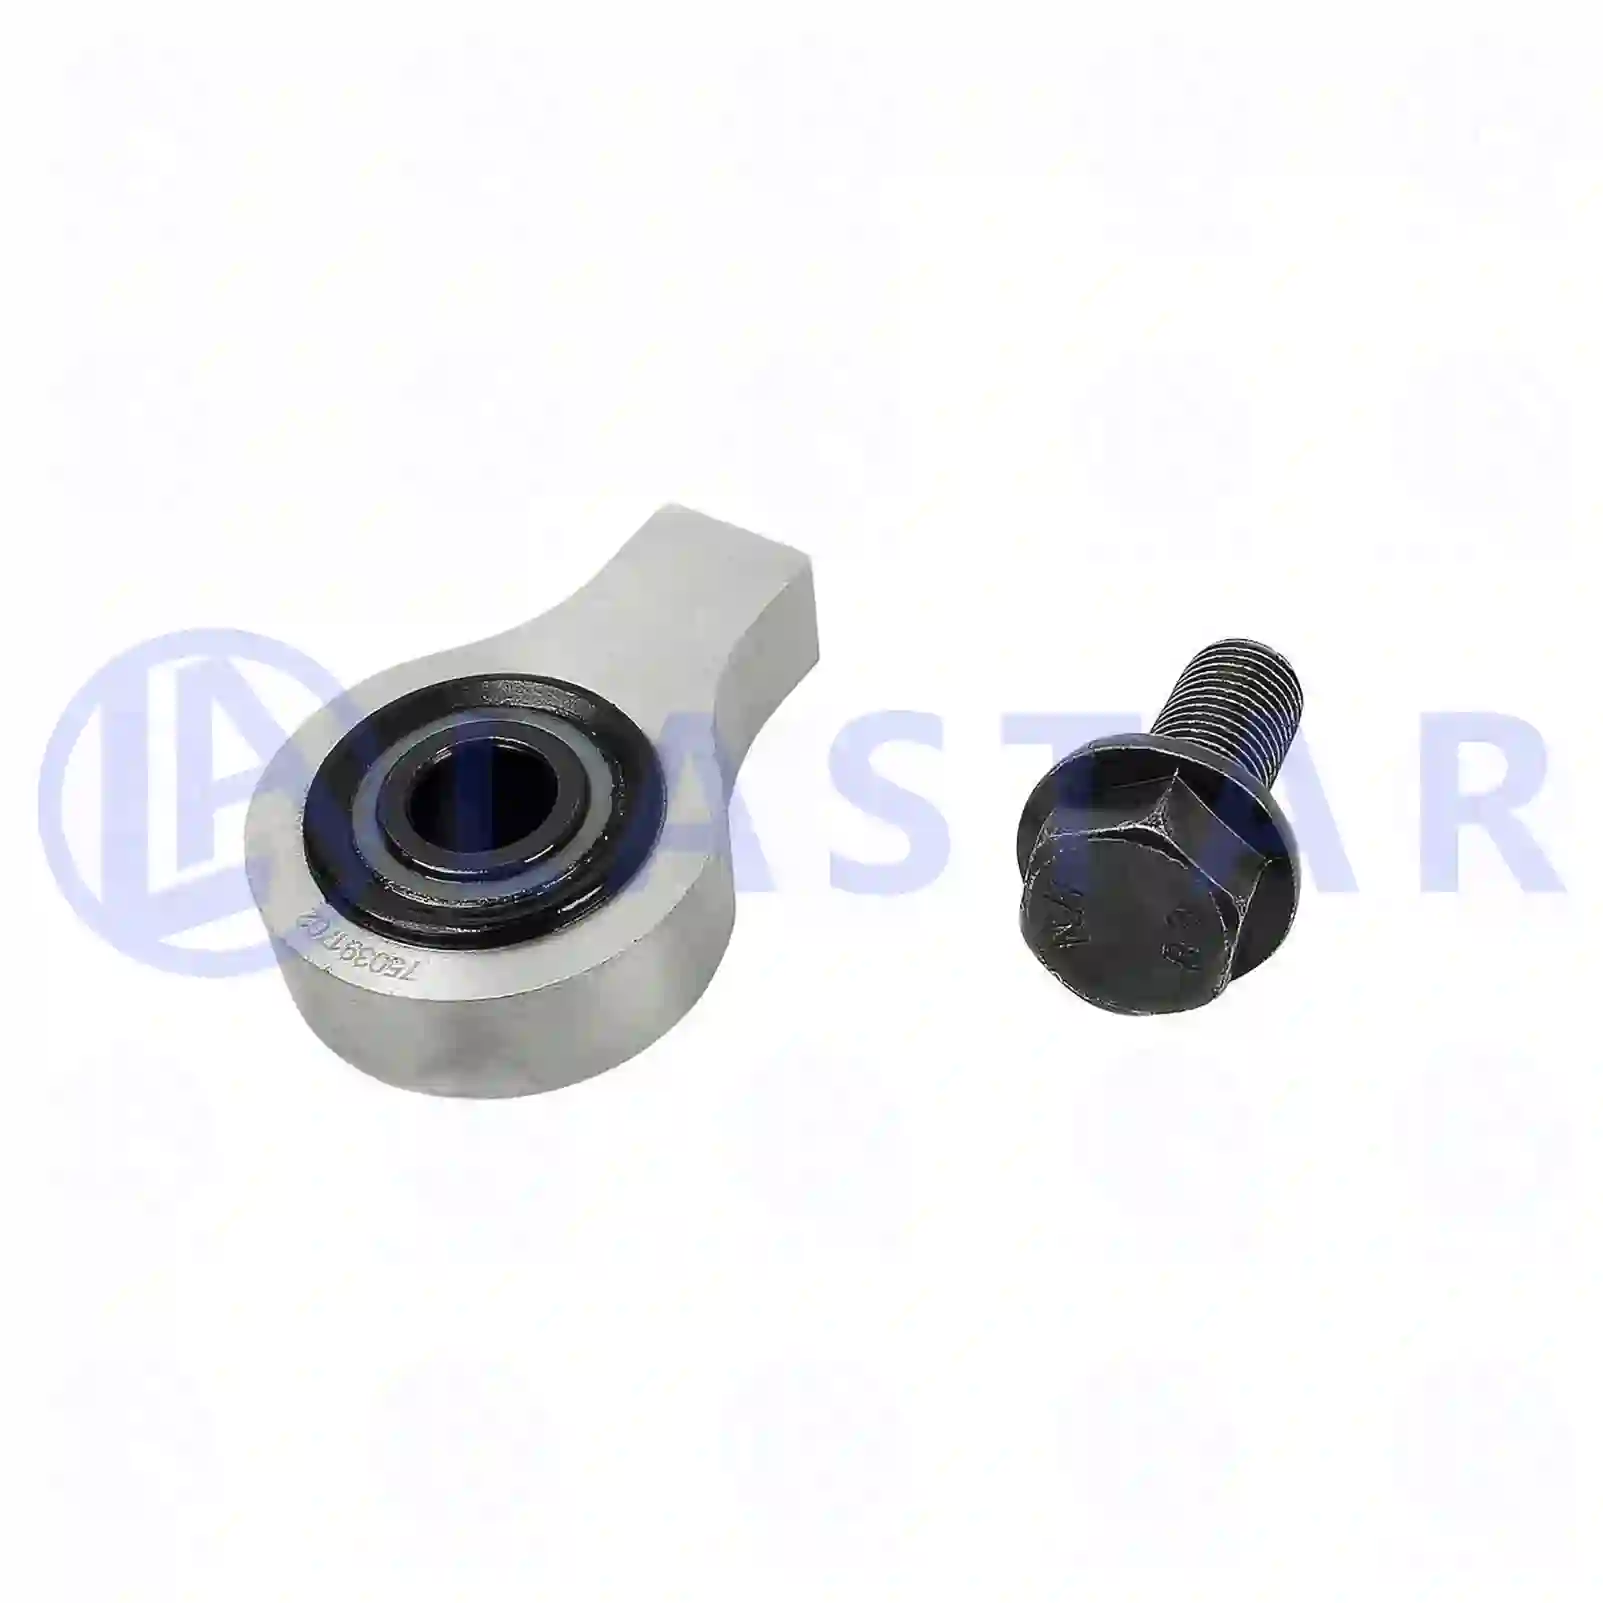 Shock Absorber Bearing joint, complete with seal rings, la no: 77736105 ,  oem no:2171717 Lastar Spare Part | Truck Spare Parts, Auotomotive Spare Parts